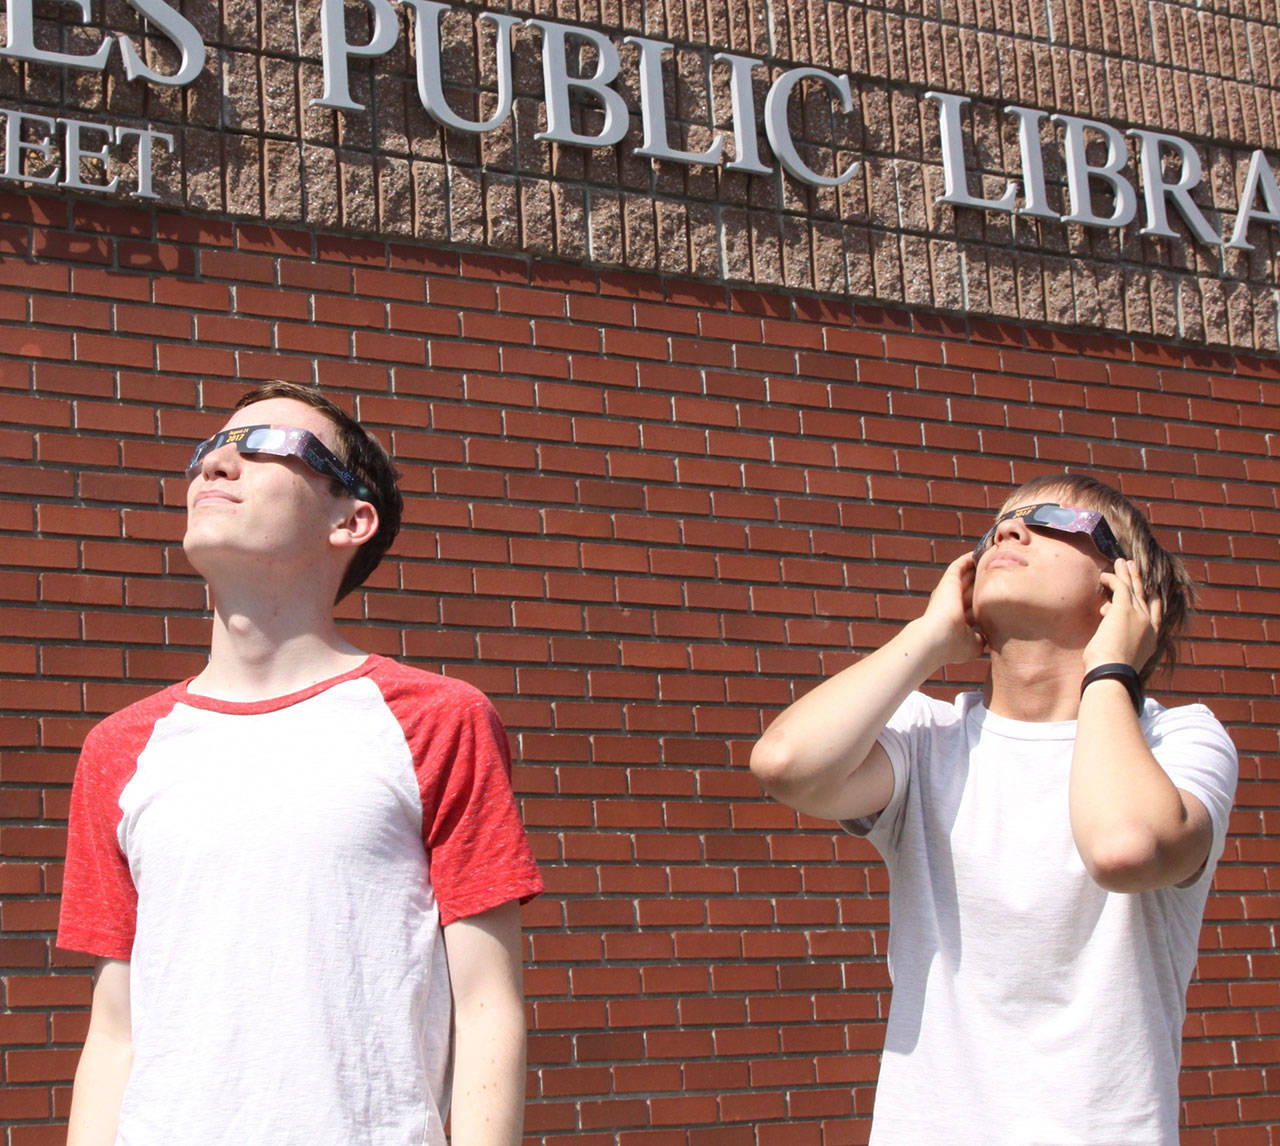 Port Angeles residents Jesse Driese, 14, and James Saskowsky, 13, try out eclipse glasses at the Port Angeles Library. On Monday, the library will hand out about 50 glasses for its solar eclipse event on a first-come, first-served basis. (David Logan/for Peninsula Daily News)